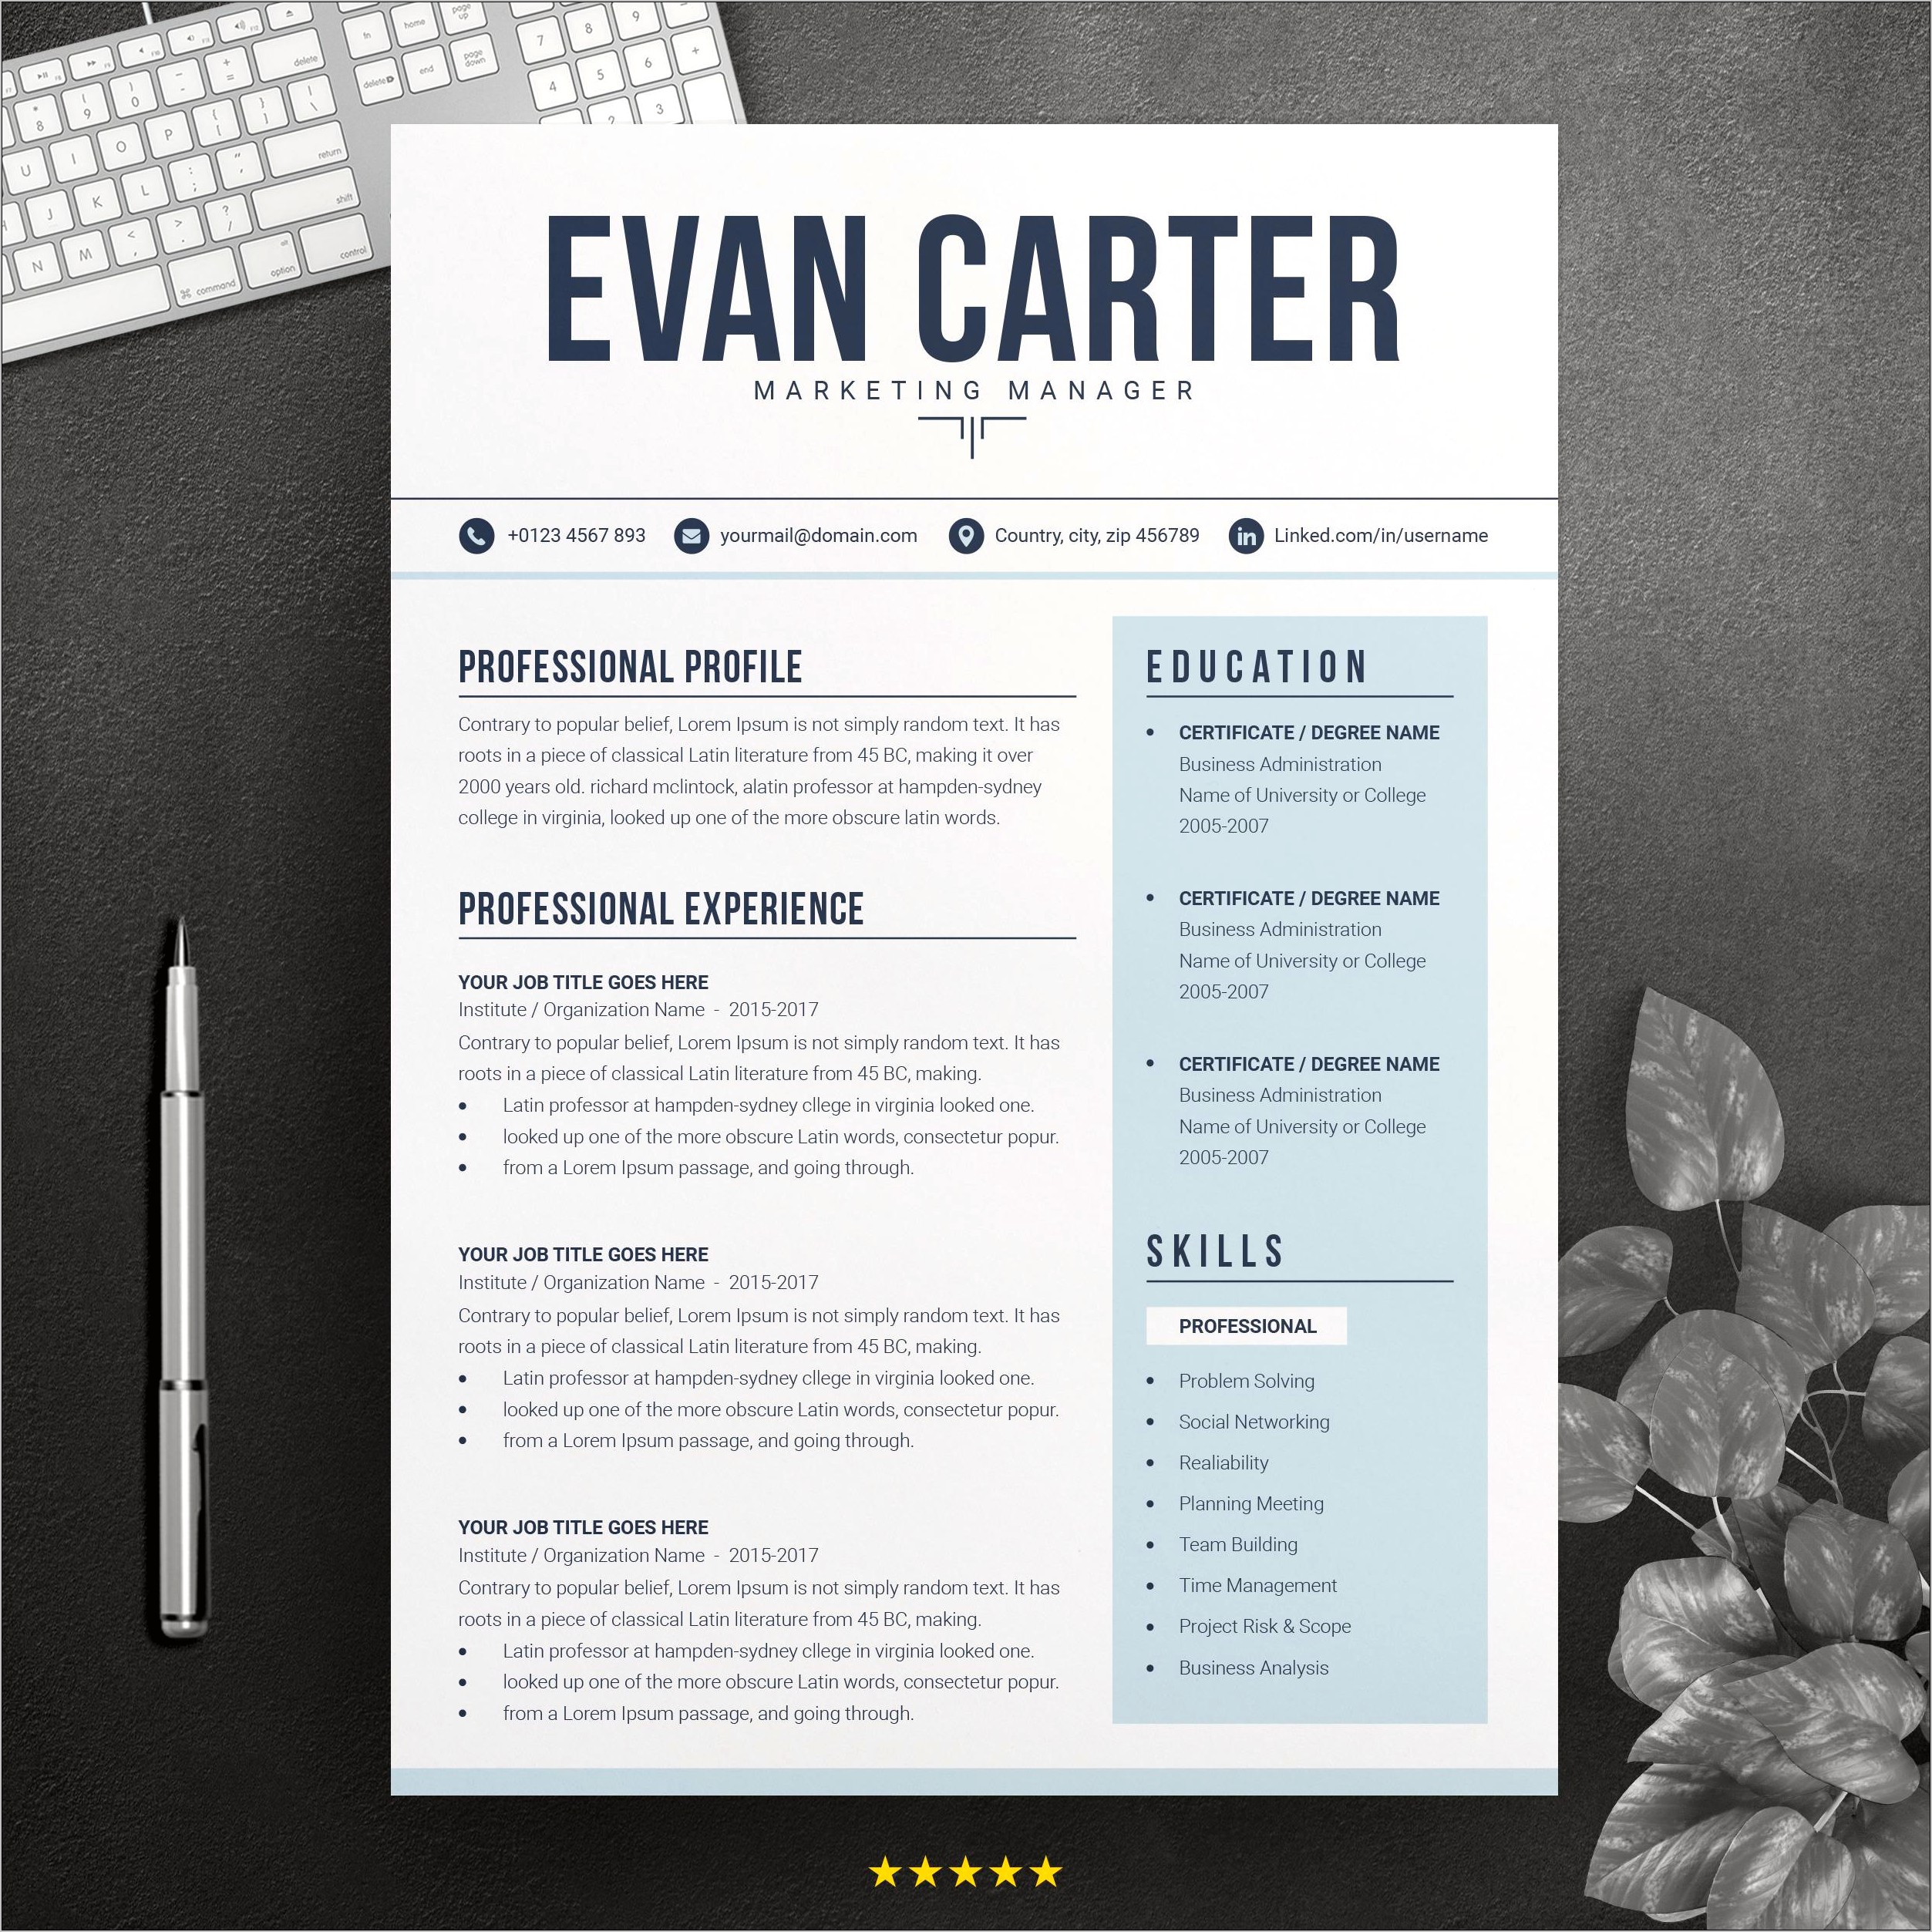 Business Admin Resume Templates Word 2007